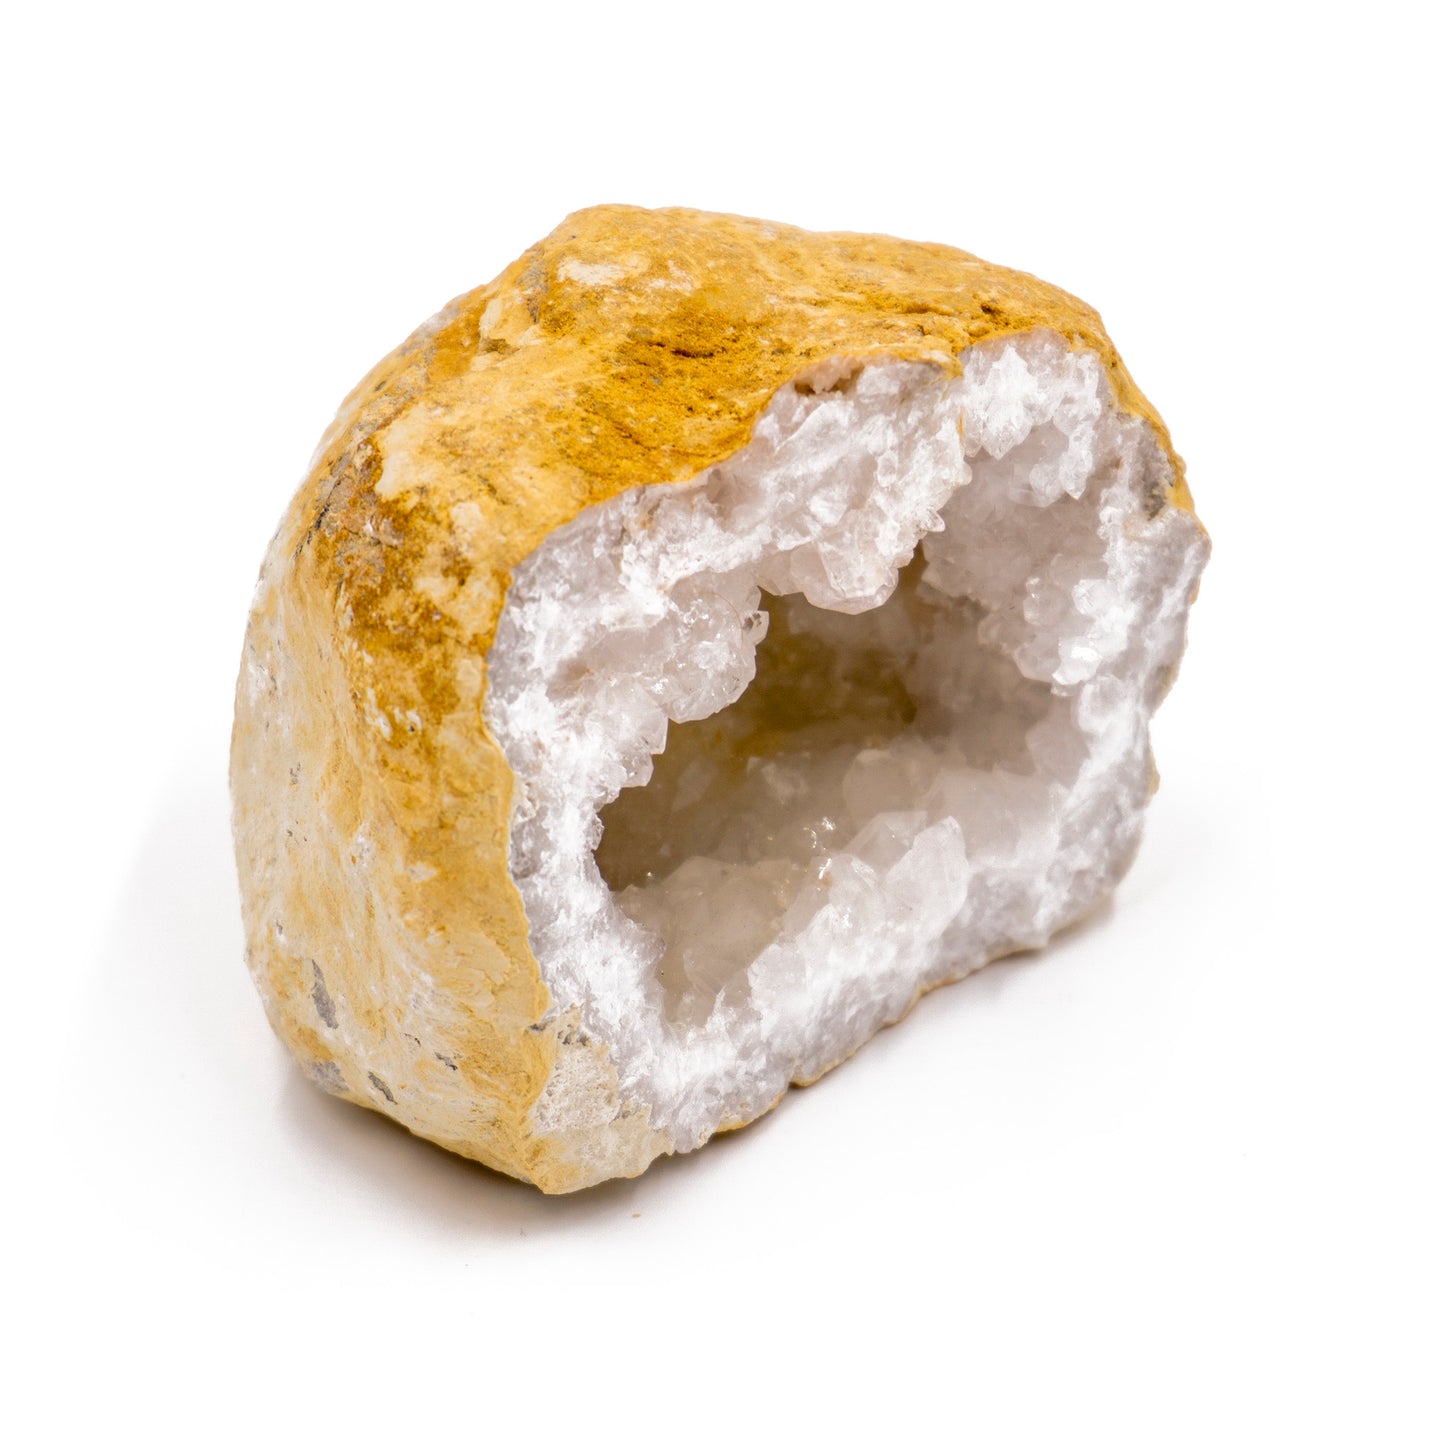 yellow stone cut in half to reveal a white crystal geode